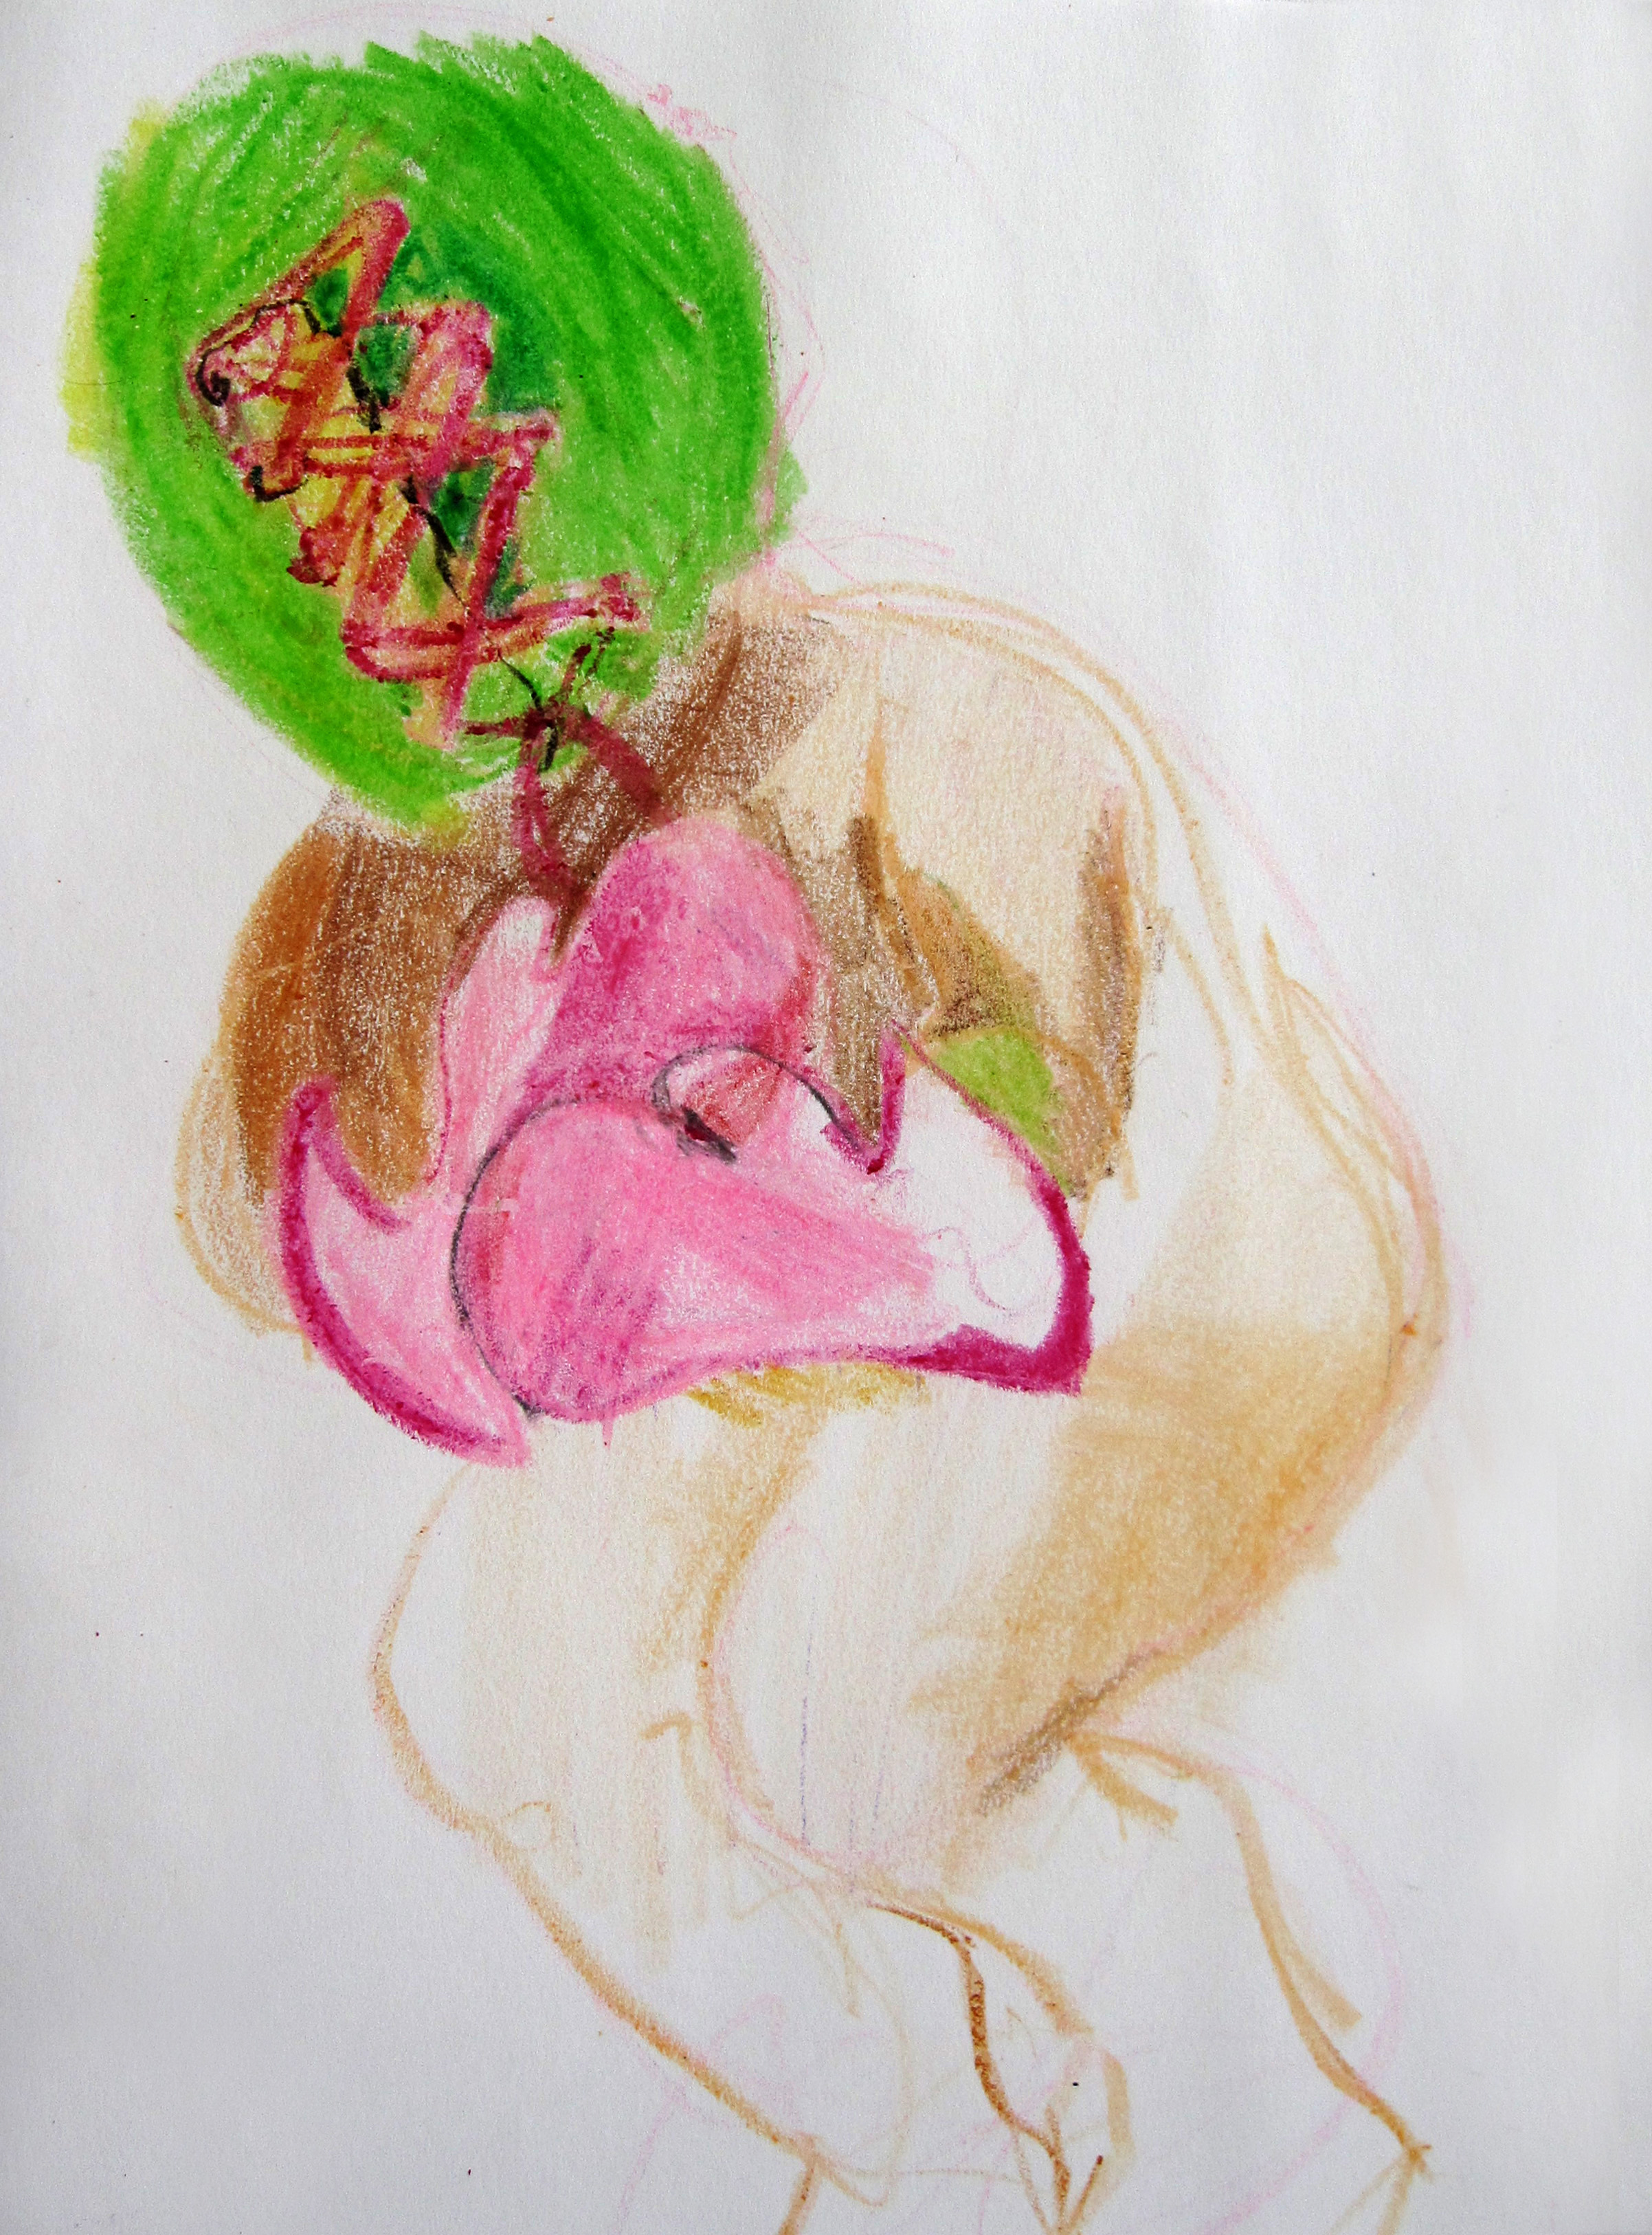 Lucha 13, 2008, Crayon on paper, 14 X11 in.